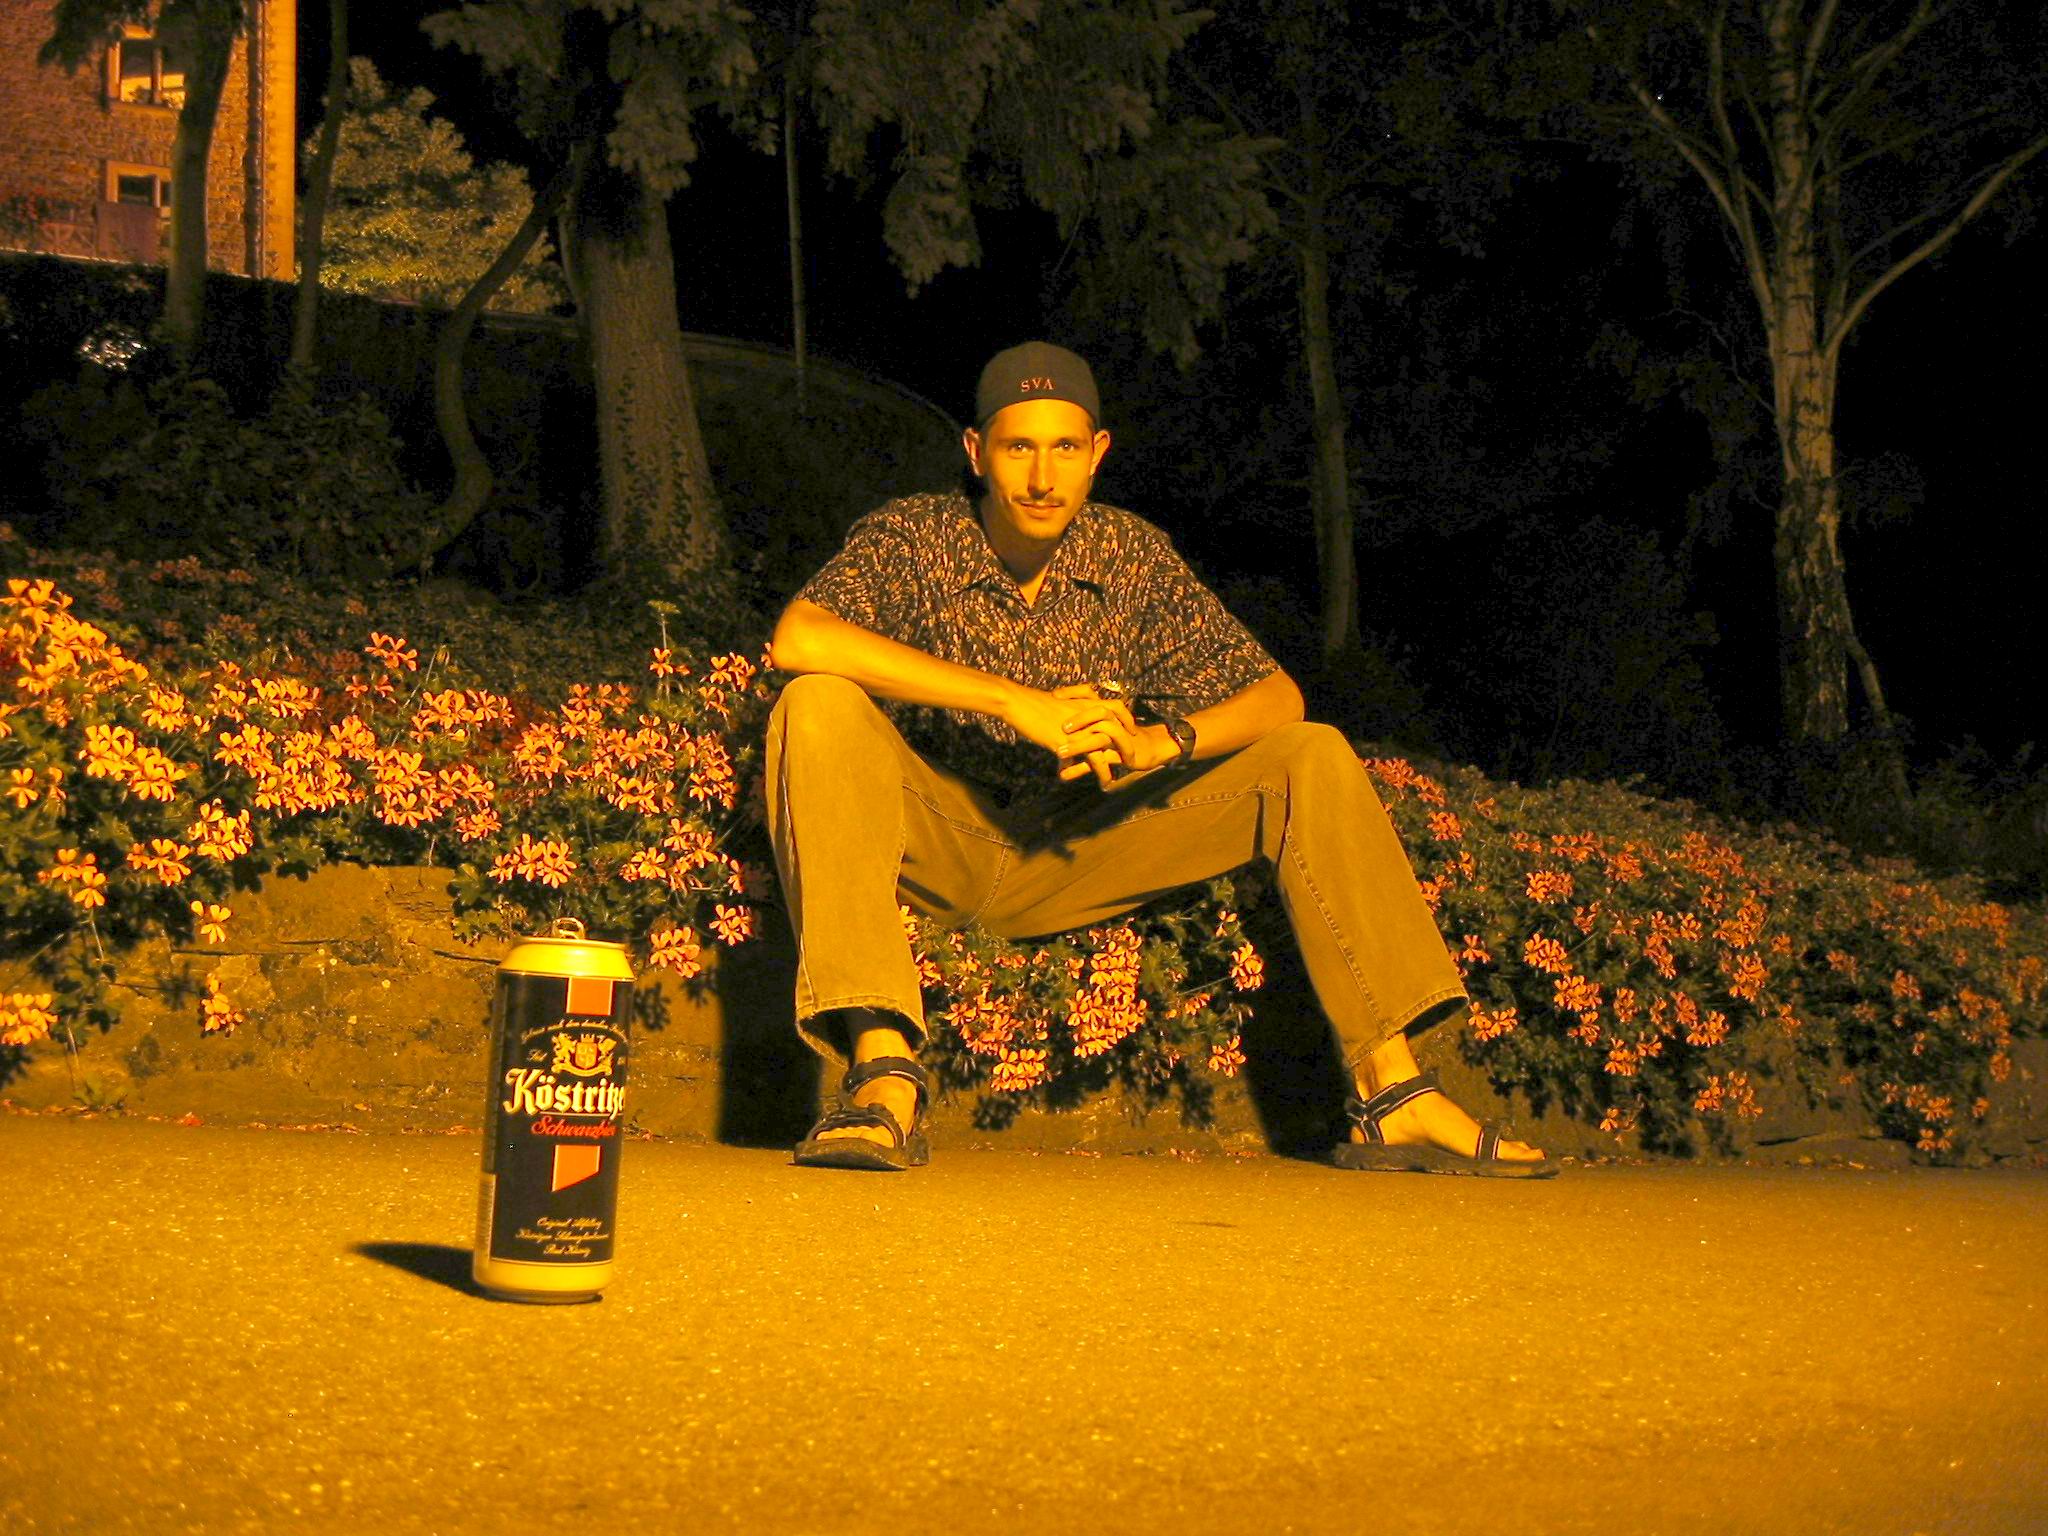 Me, my beer, and the crushing of flowers